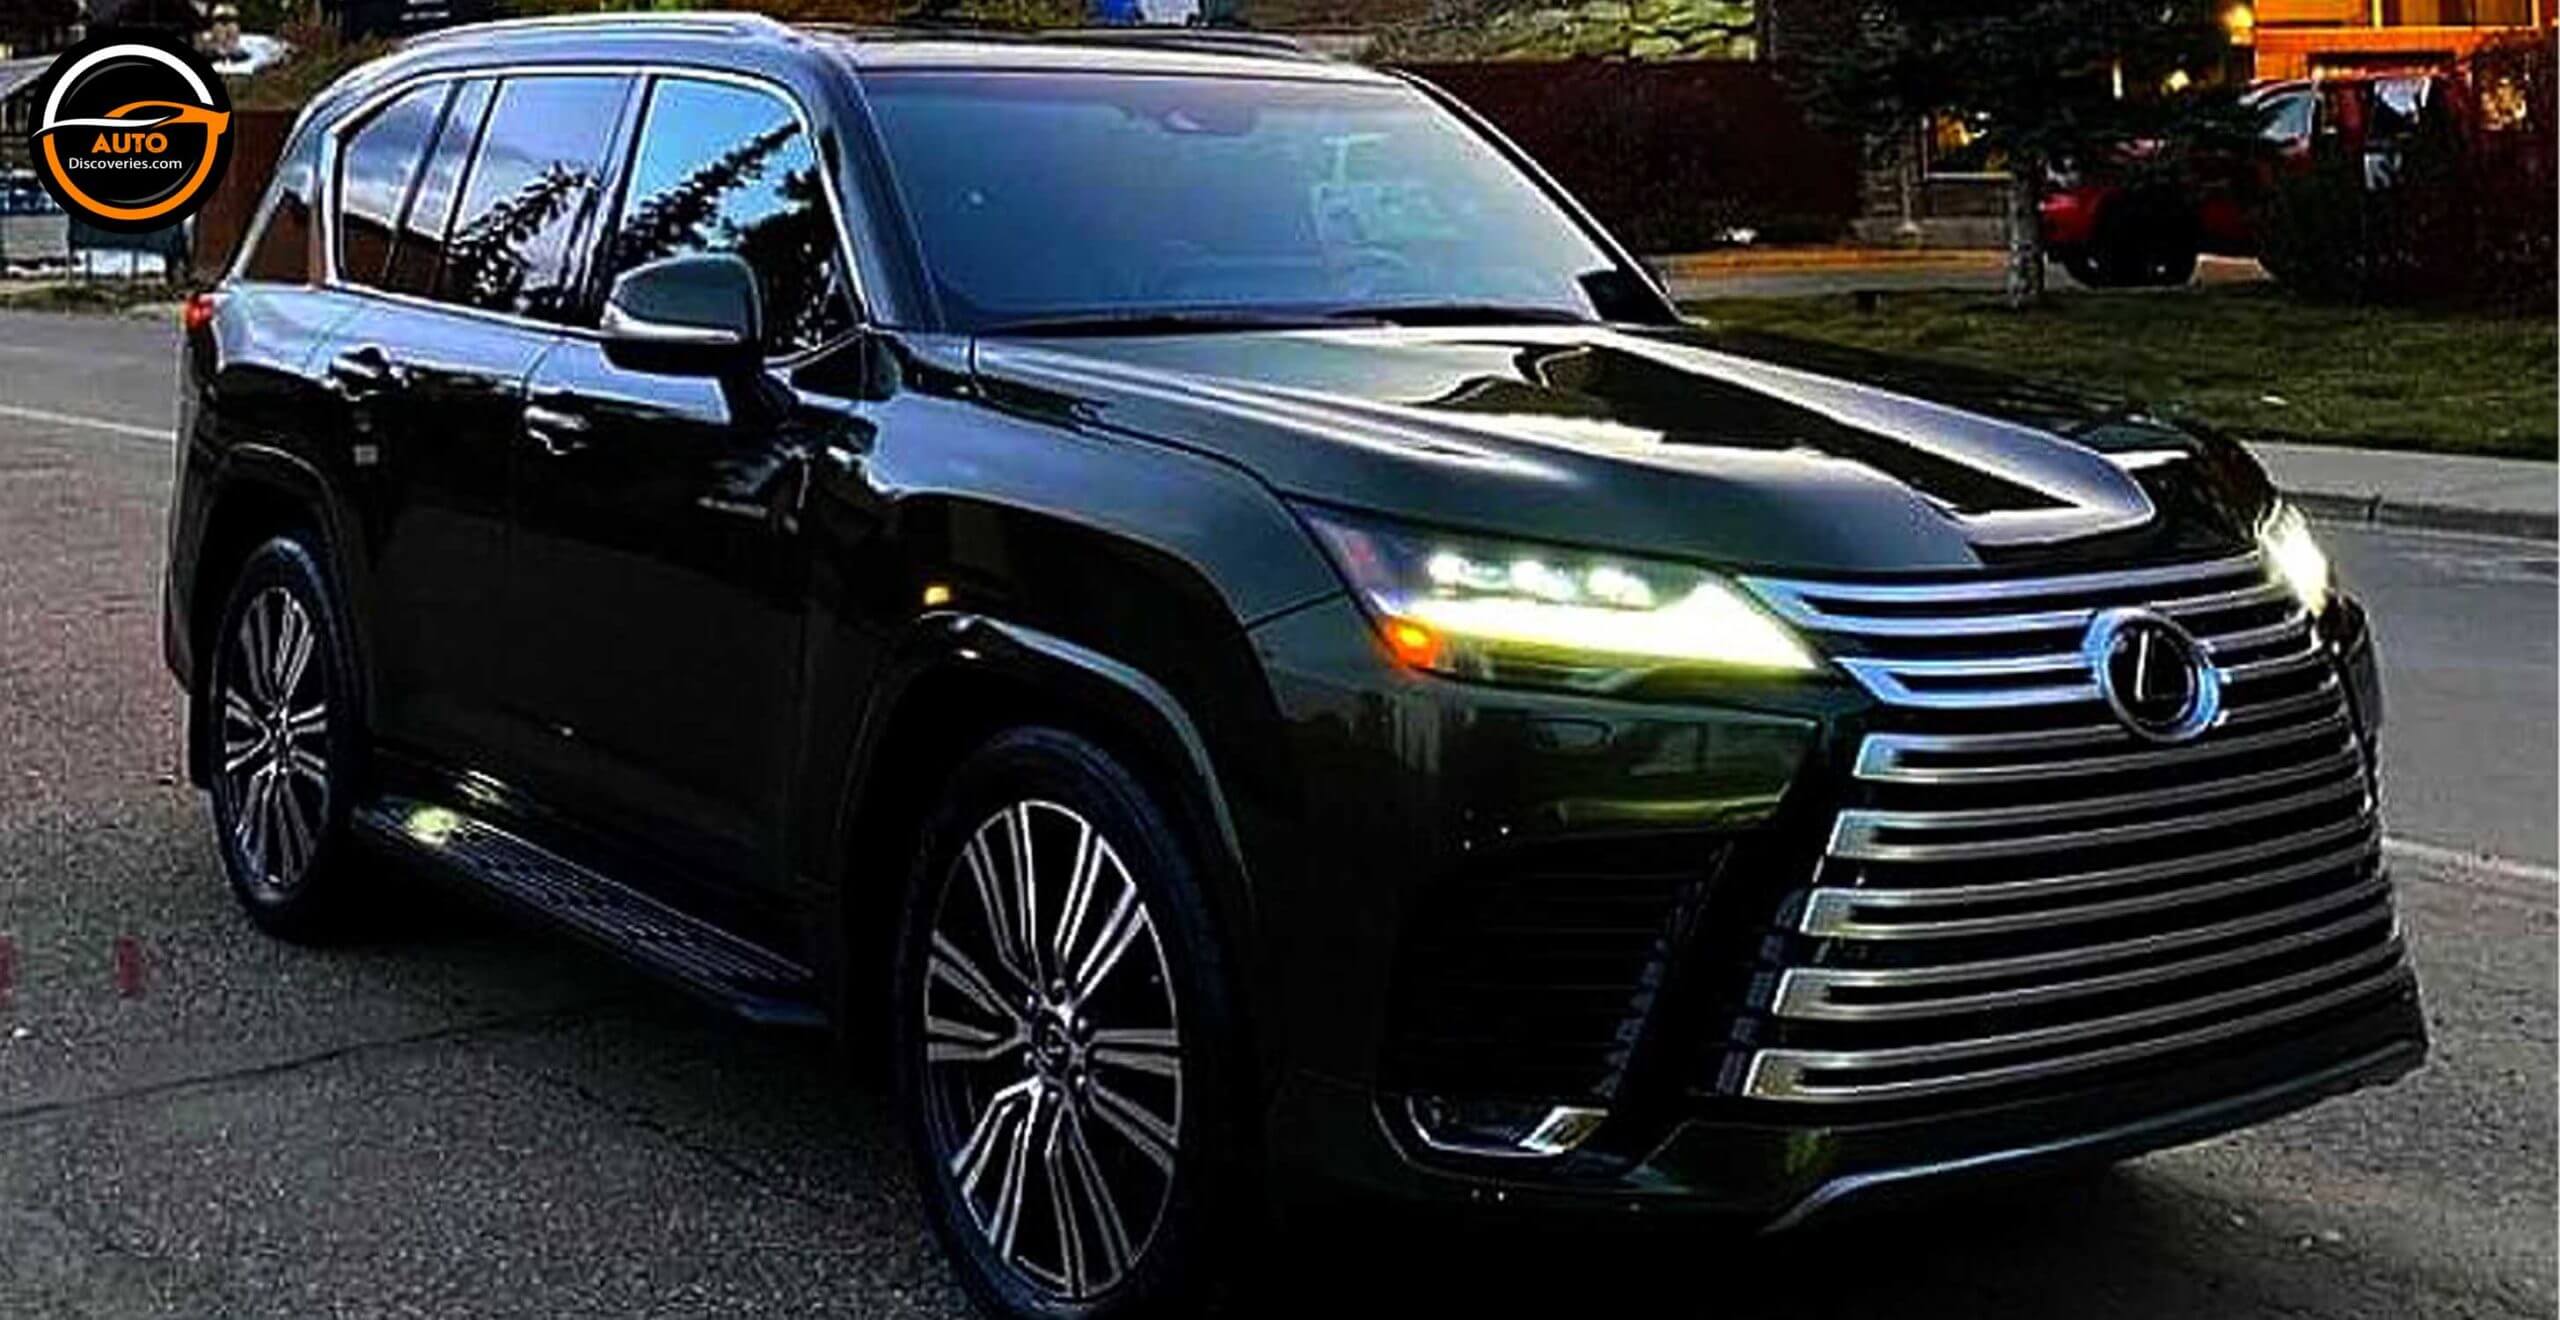 2022 Lexus LX600 In Army Green, Ultra Luxurious SUV! Auto Discoveries